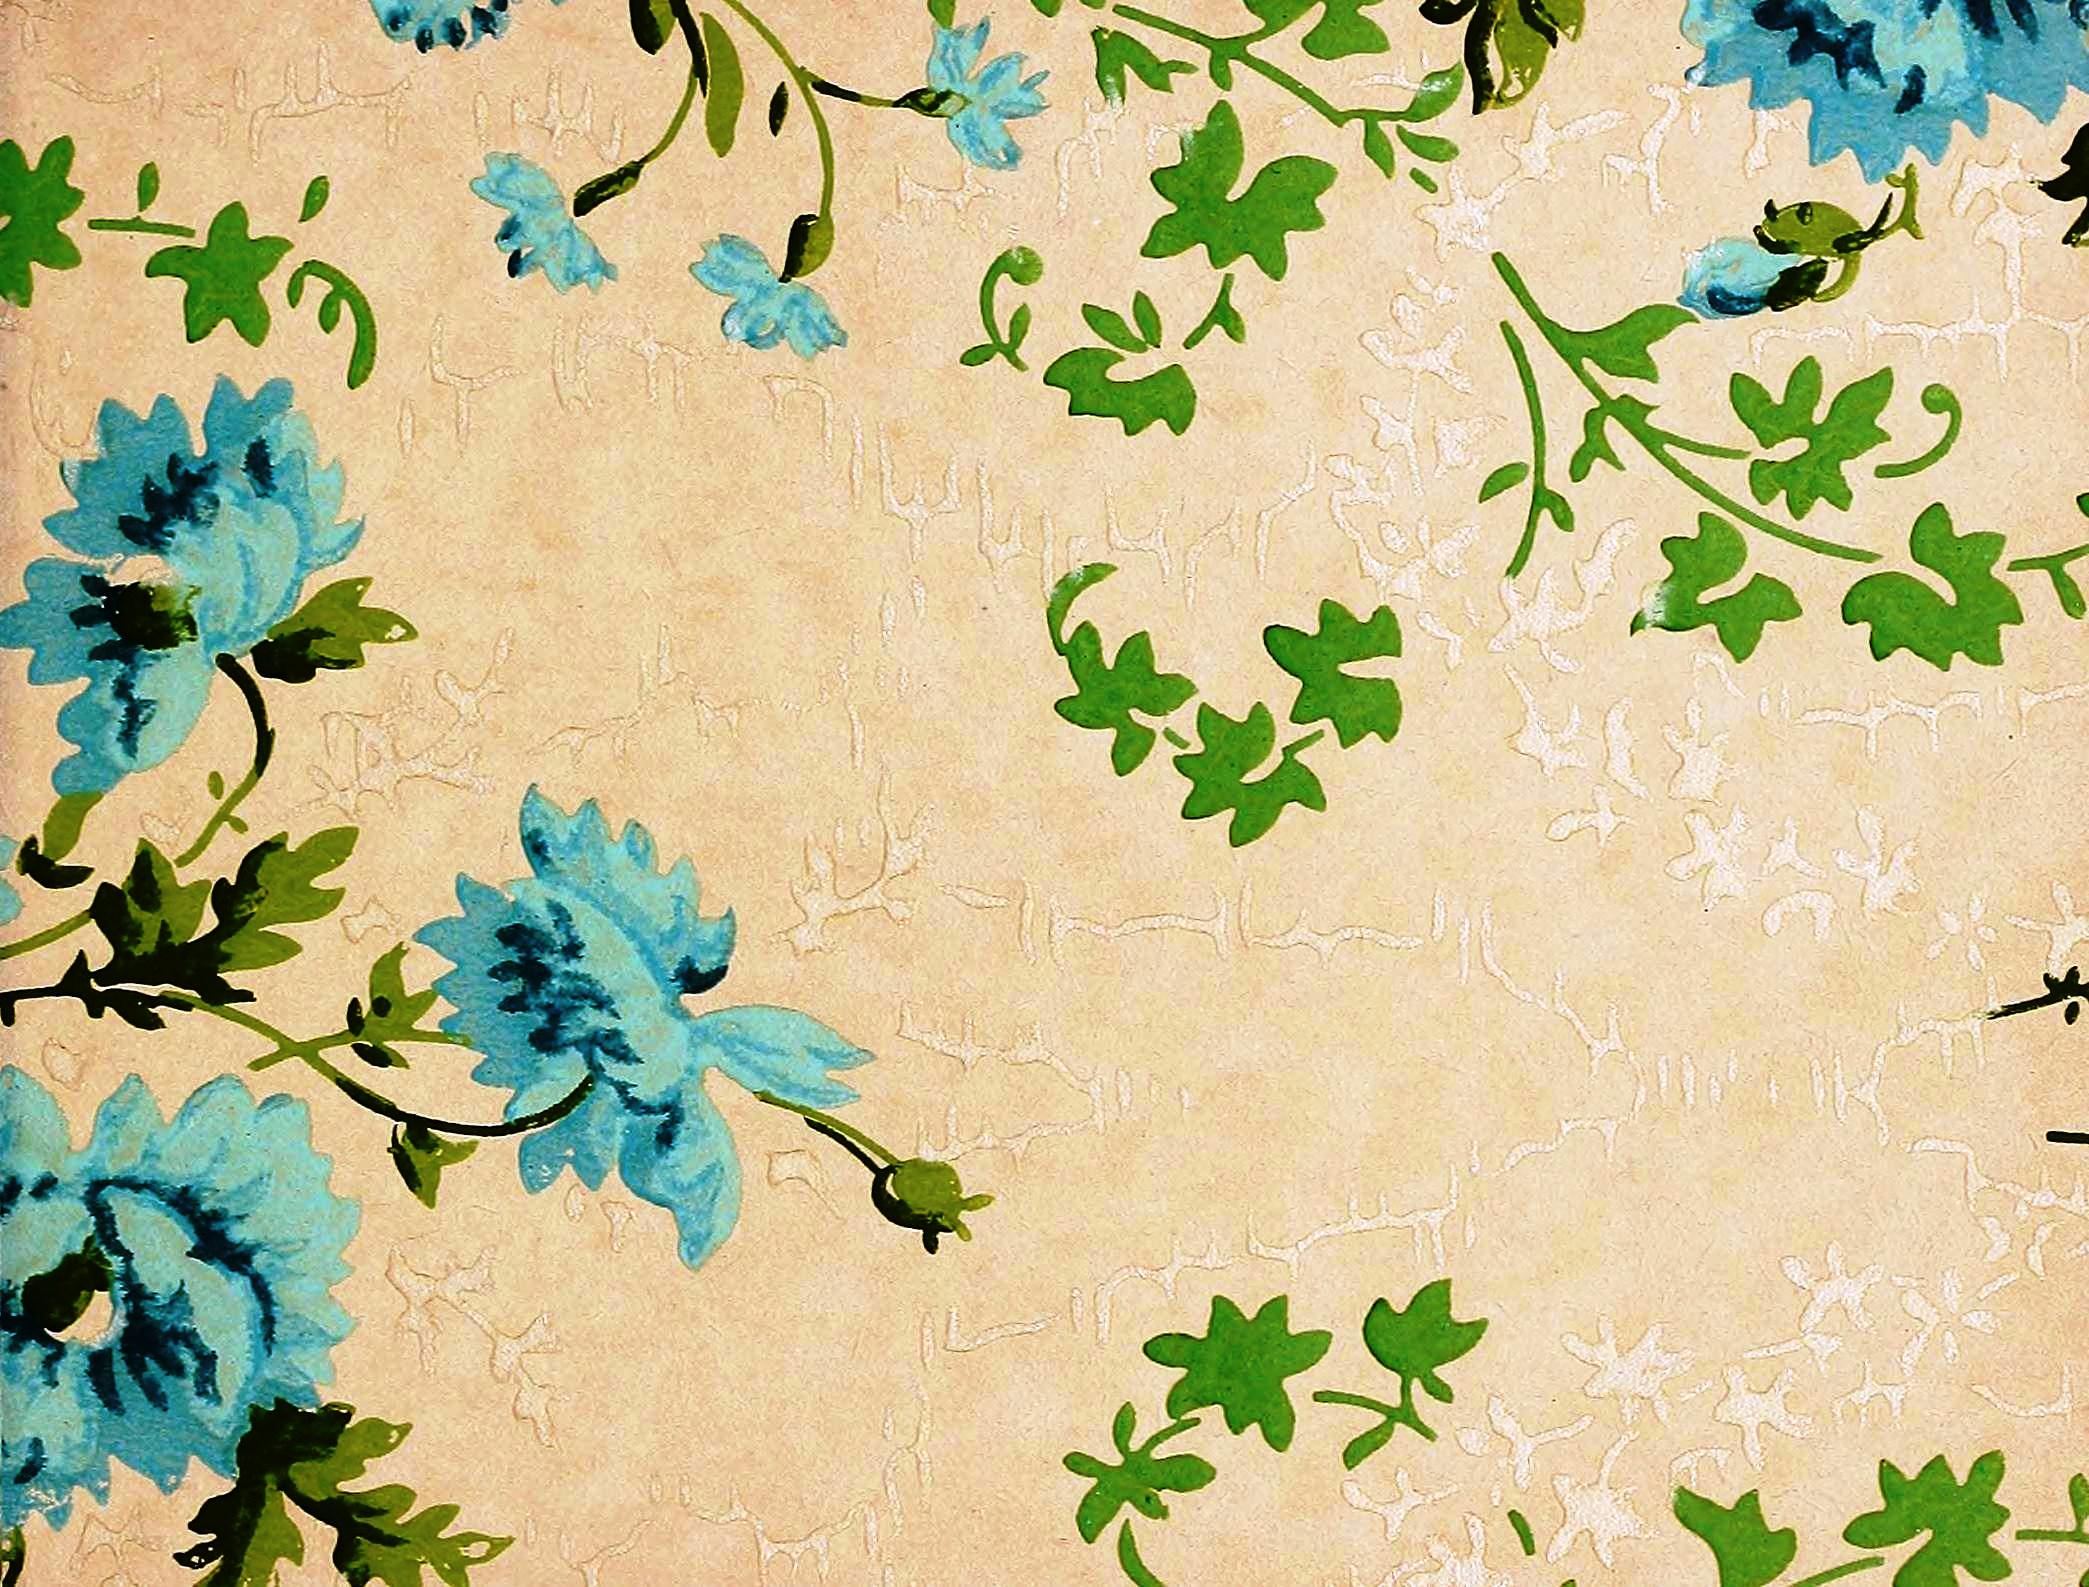 Wallpaper Samples Scan Of D Image In The Public Domain